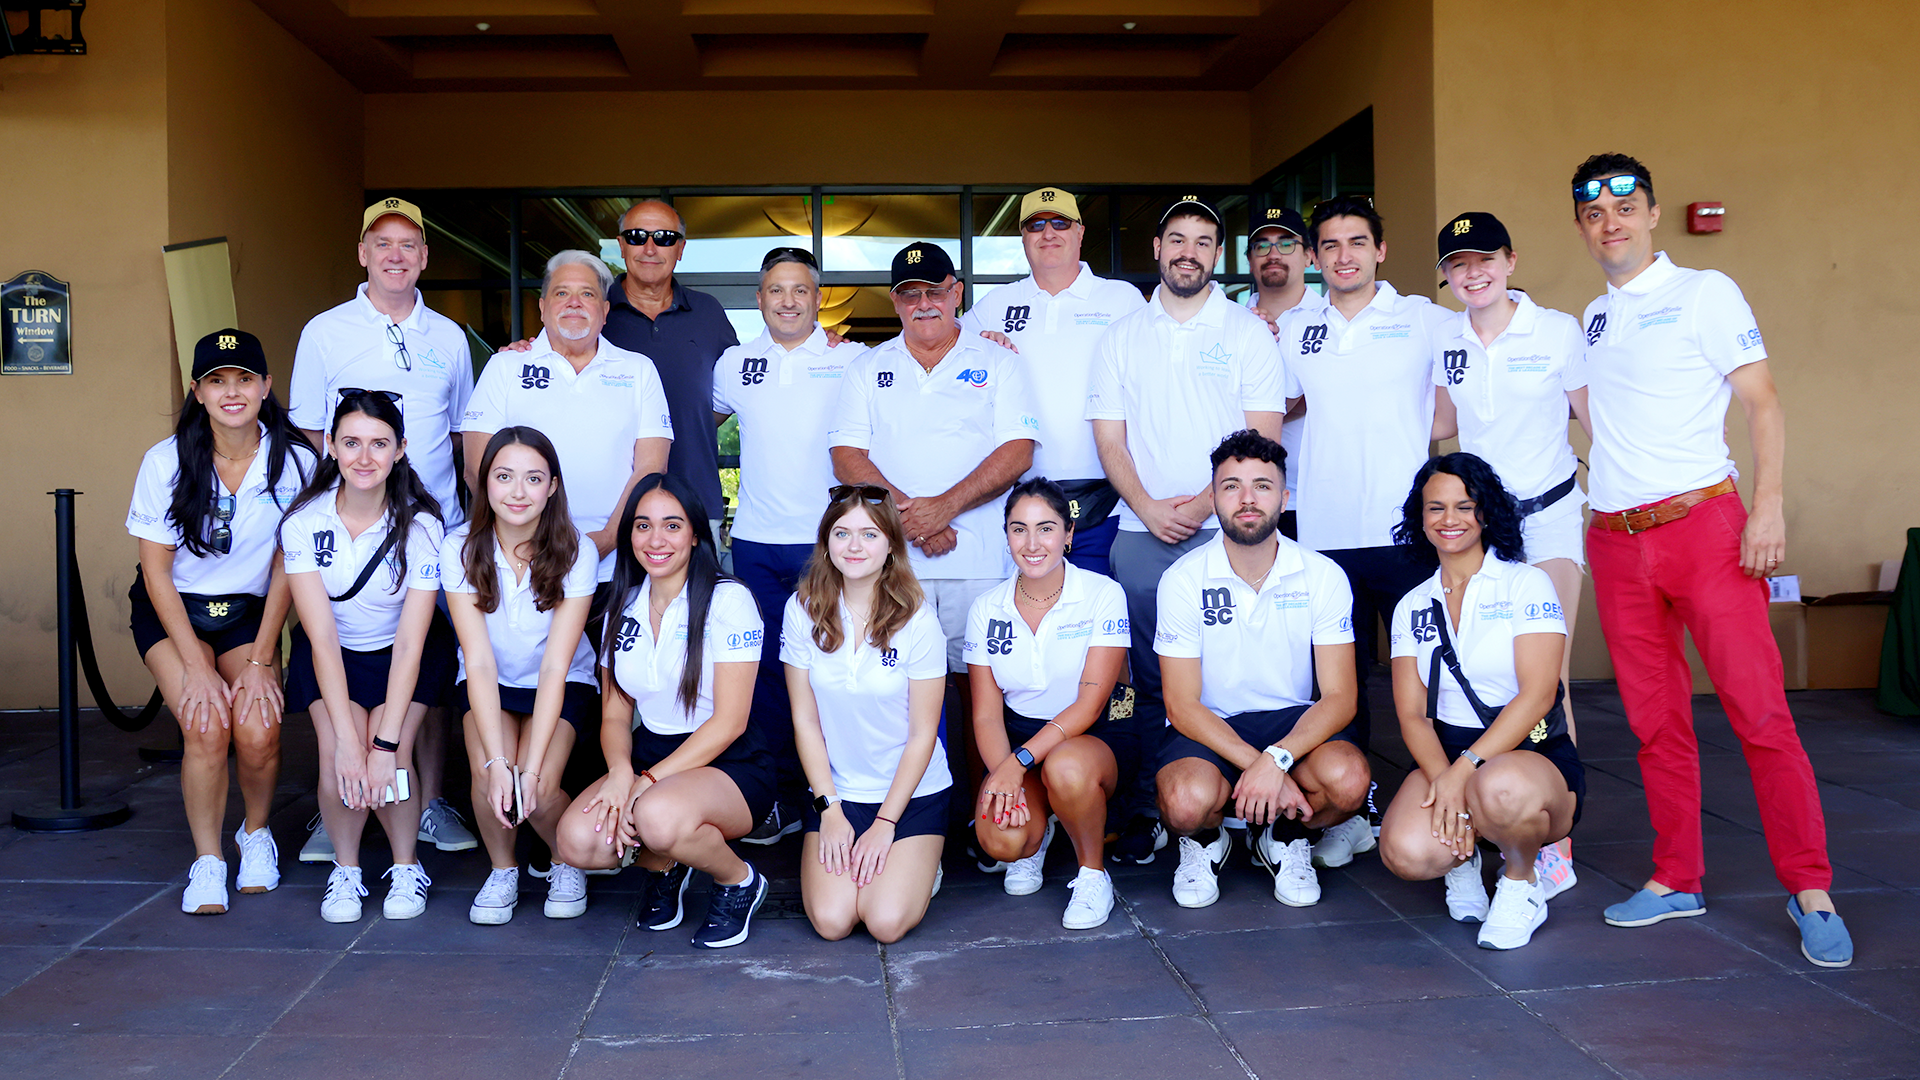 MSC Raises Over $200,000 for Operation Smile at Charity Golf Tournament in New York, USA